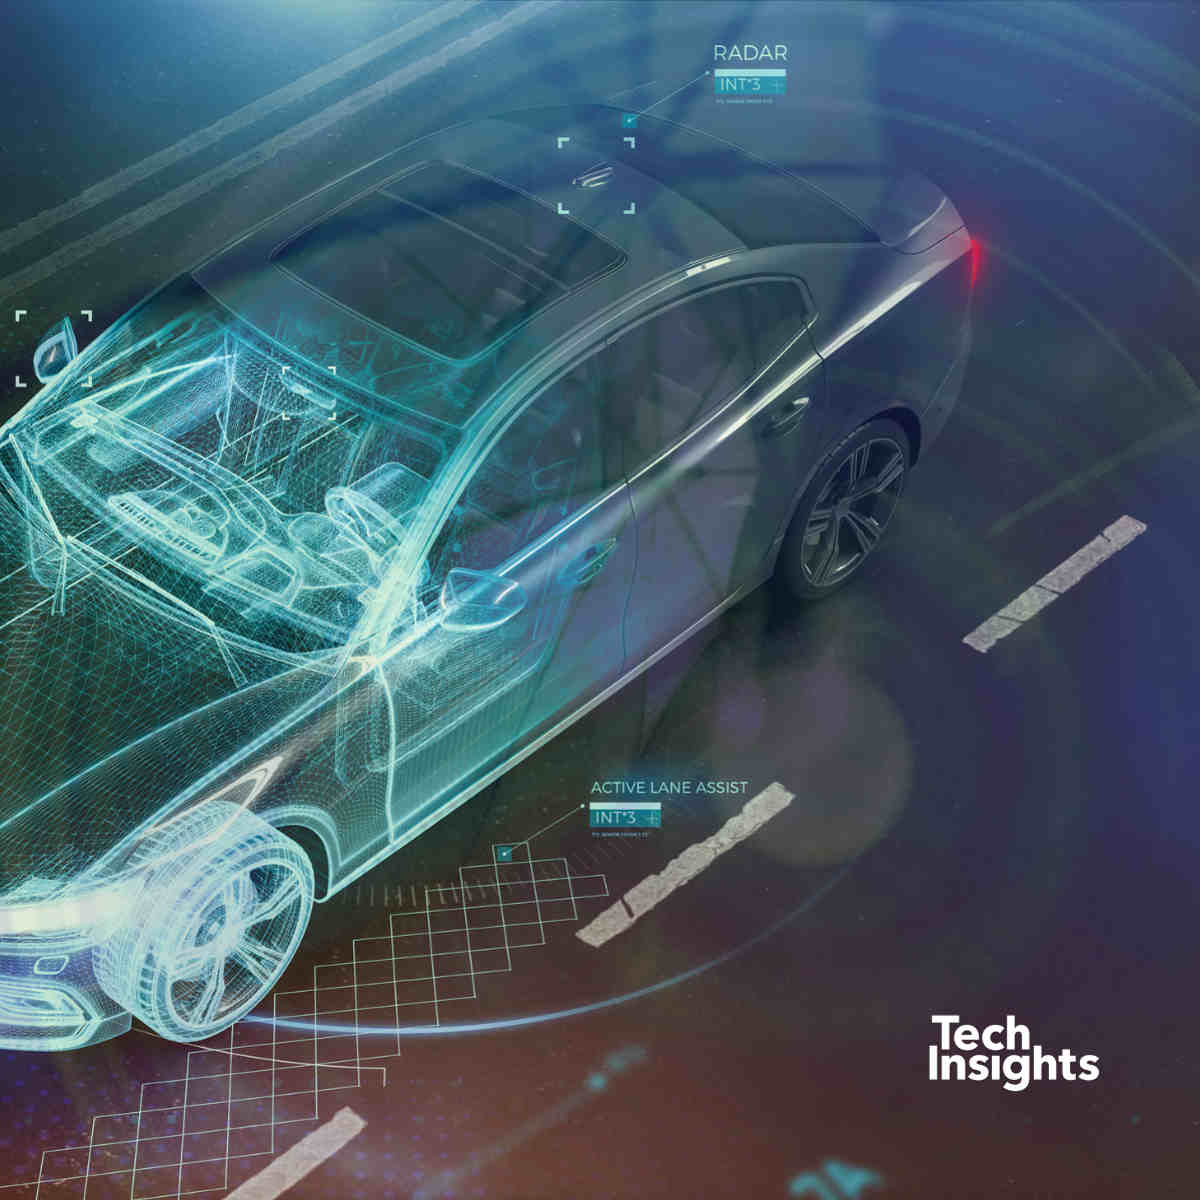 👉bit.ly/3QaddqJ How will @Sony, @onsemi, @Samsung deliver image sensors with higher temperature tolerance, effective night-time performance, reduced LED flicker for automotive applications? Find out what our experts learned from presentations at IISW 23.